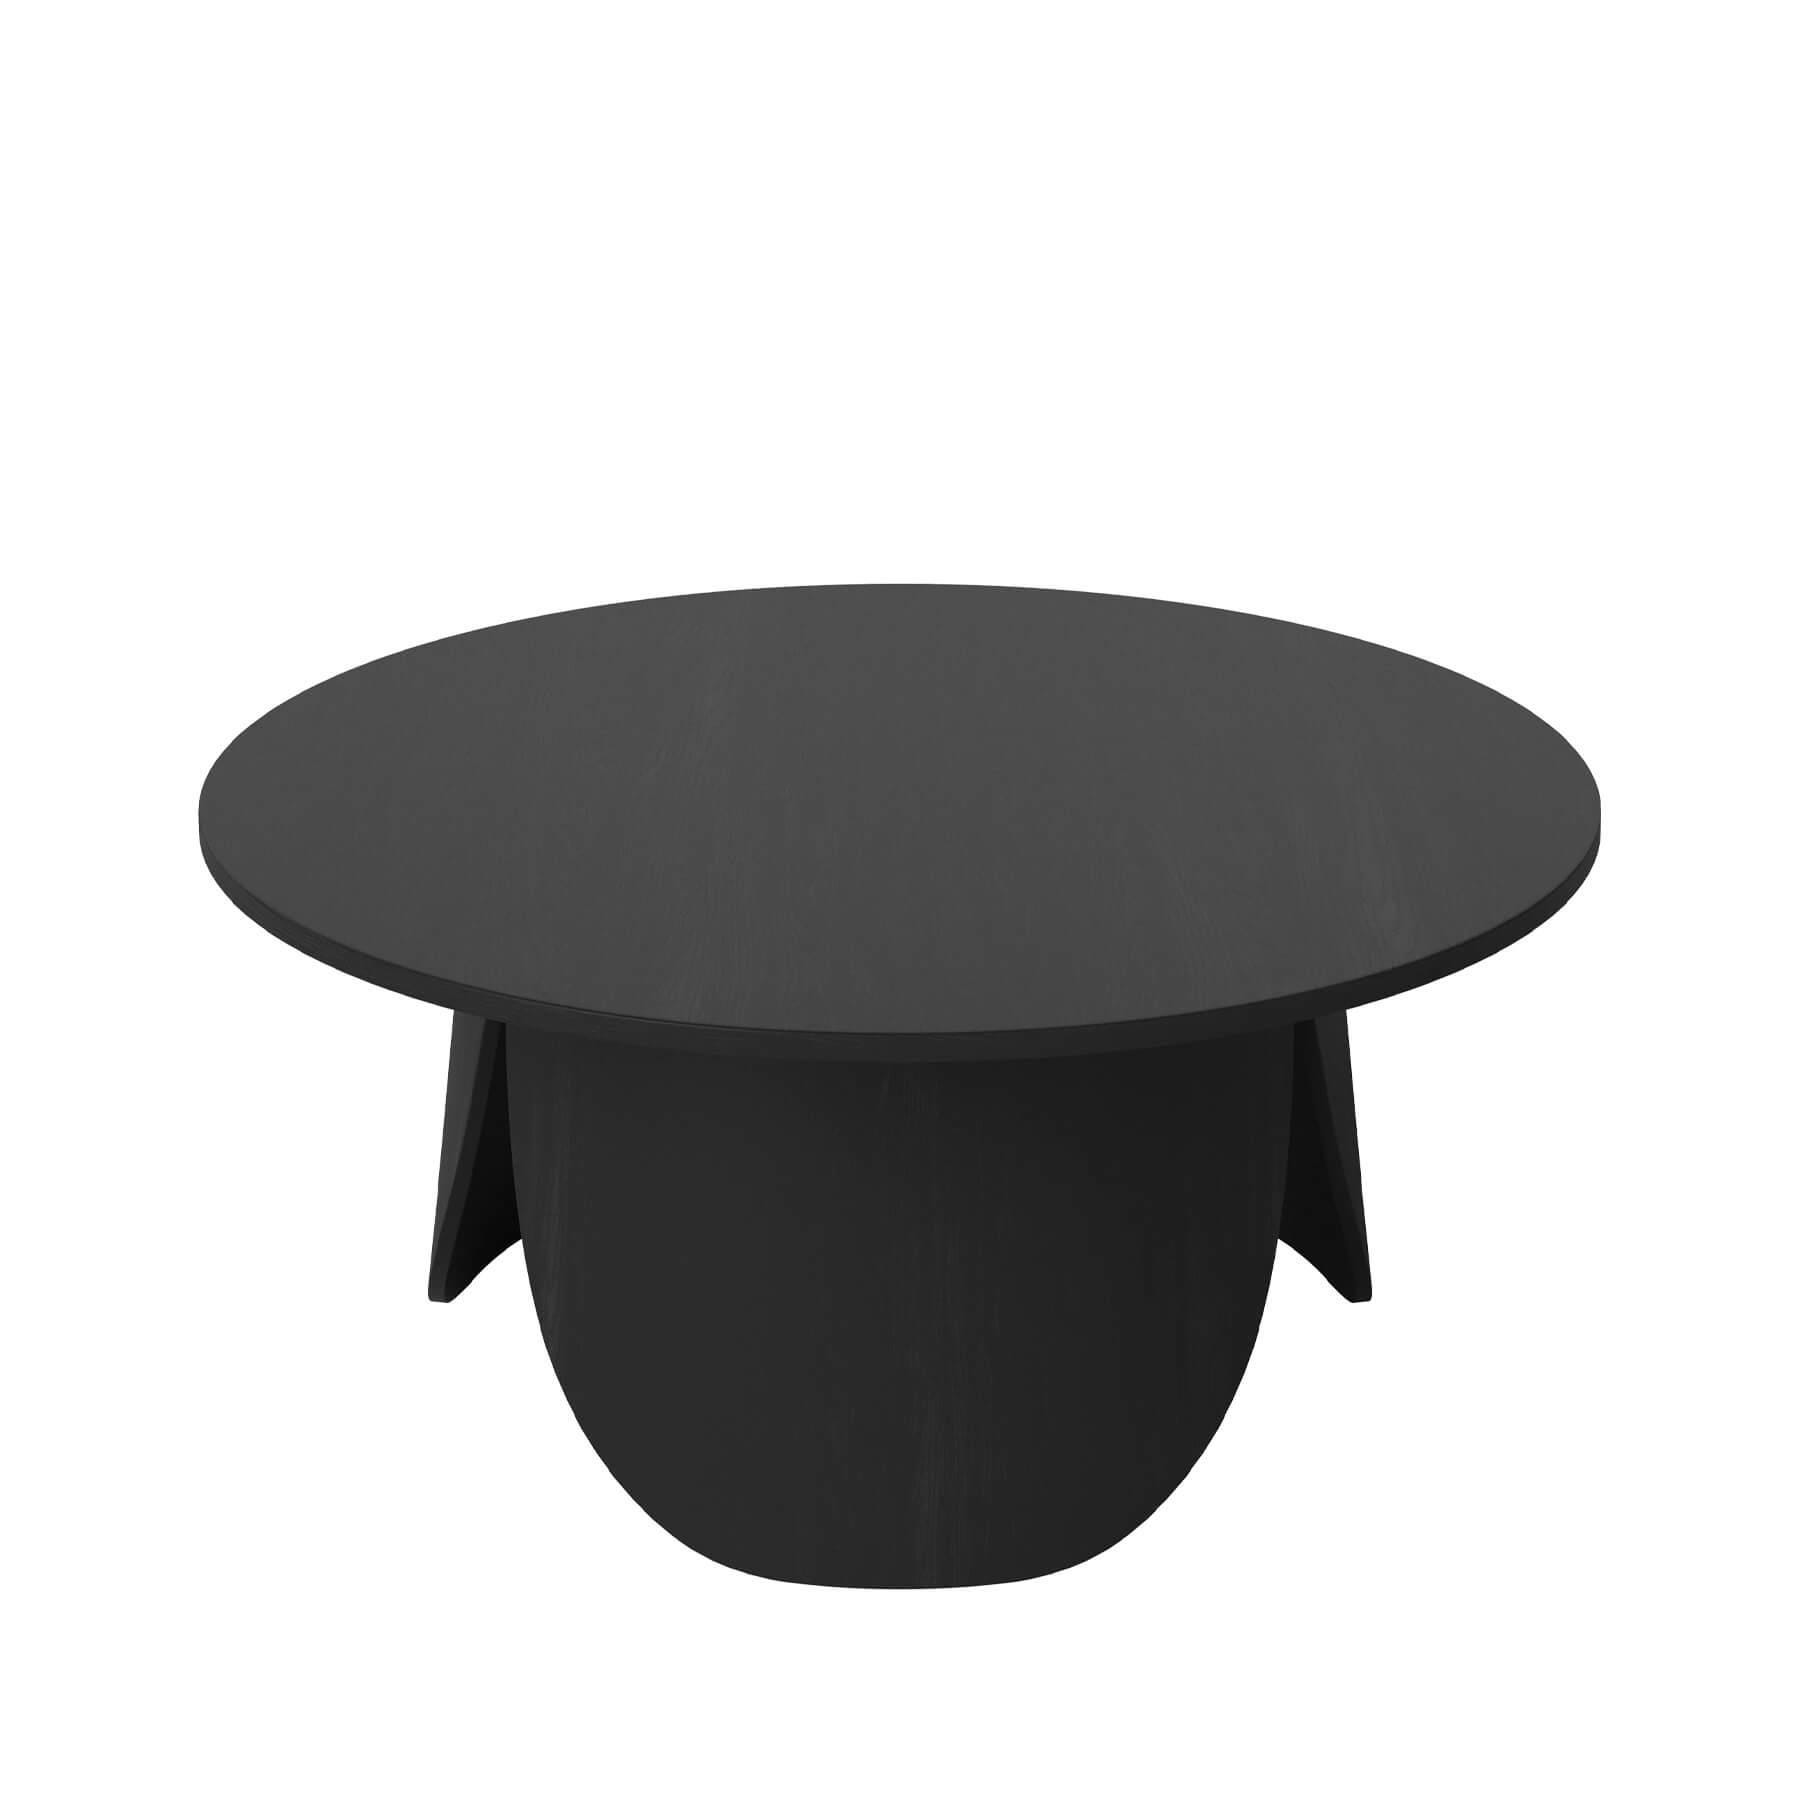 Bolia Peyote Coffee Table Large Low Black Stained Lacquer Designer Furniture From Holloways Of Ludlow